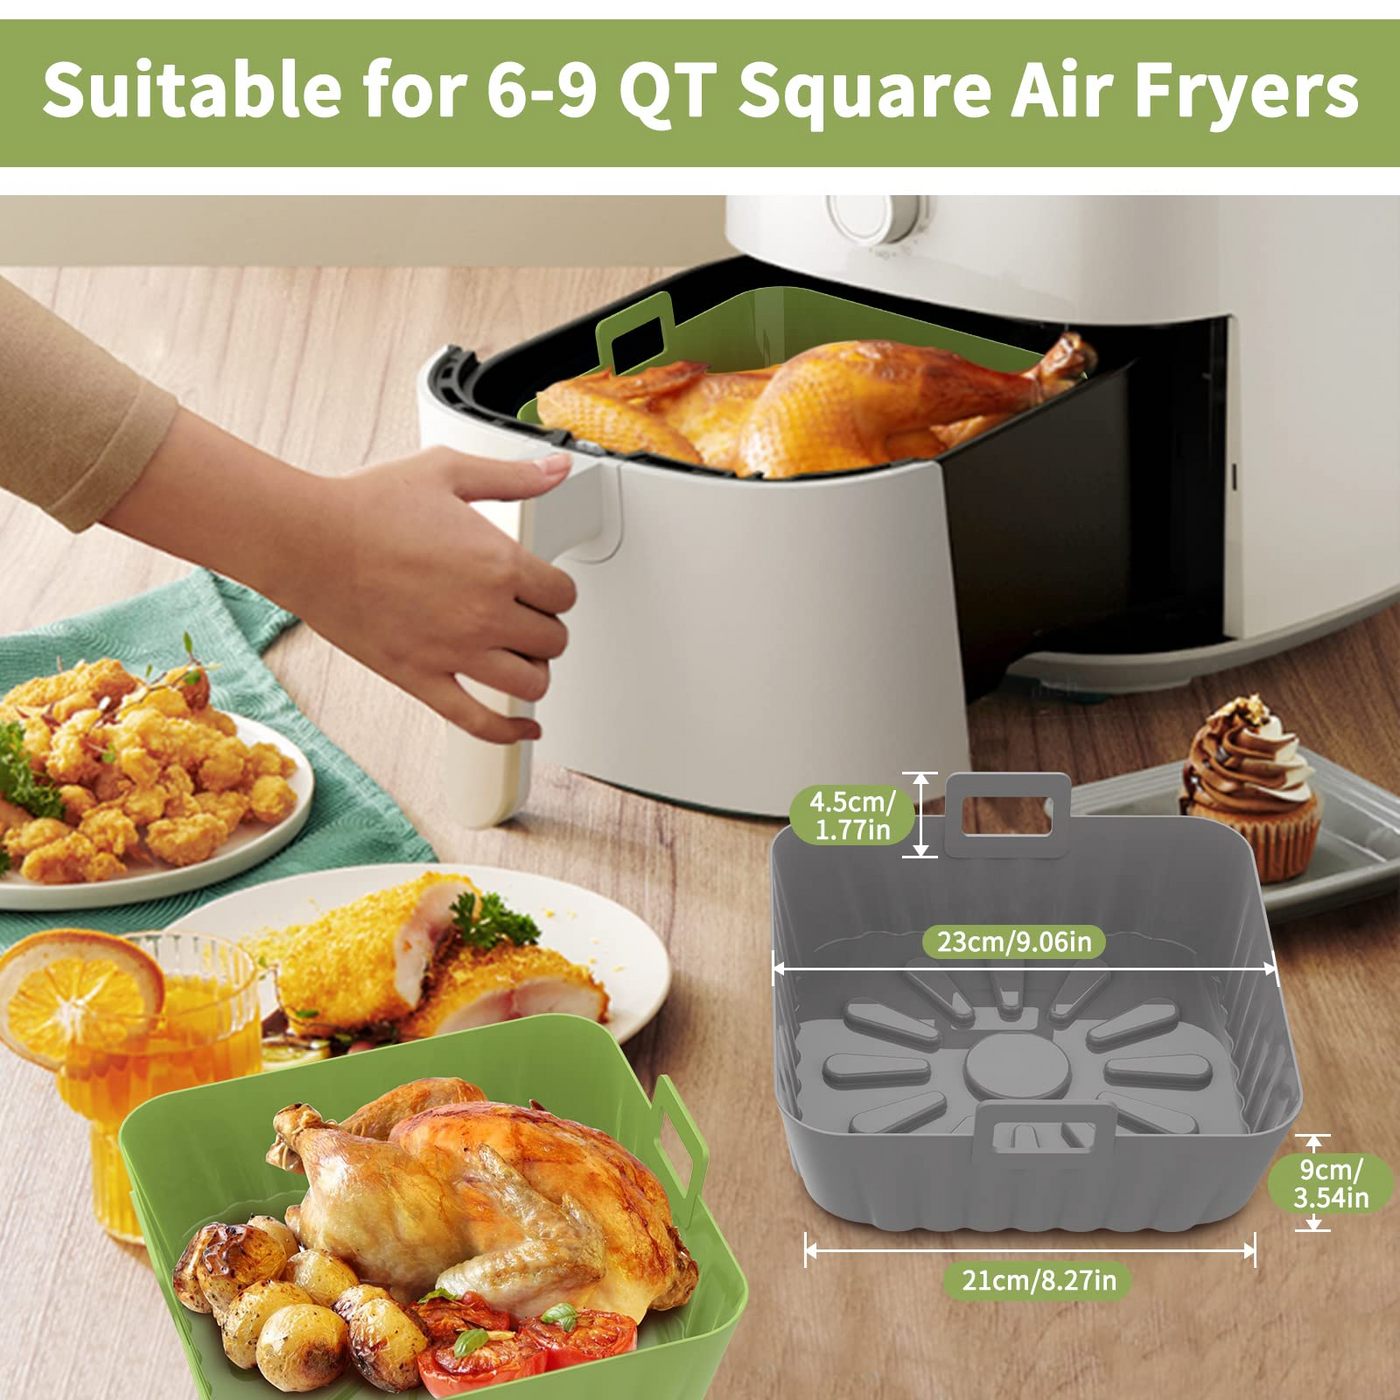 Visland Silicone Air Fryer Liner 7.5/8.5 inch Reusable Air Fryer